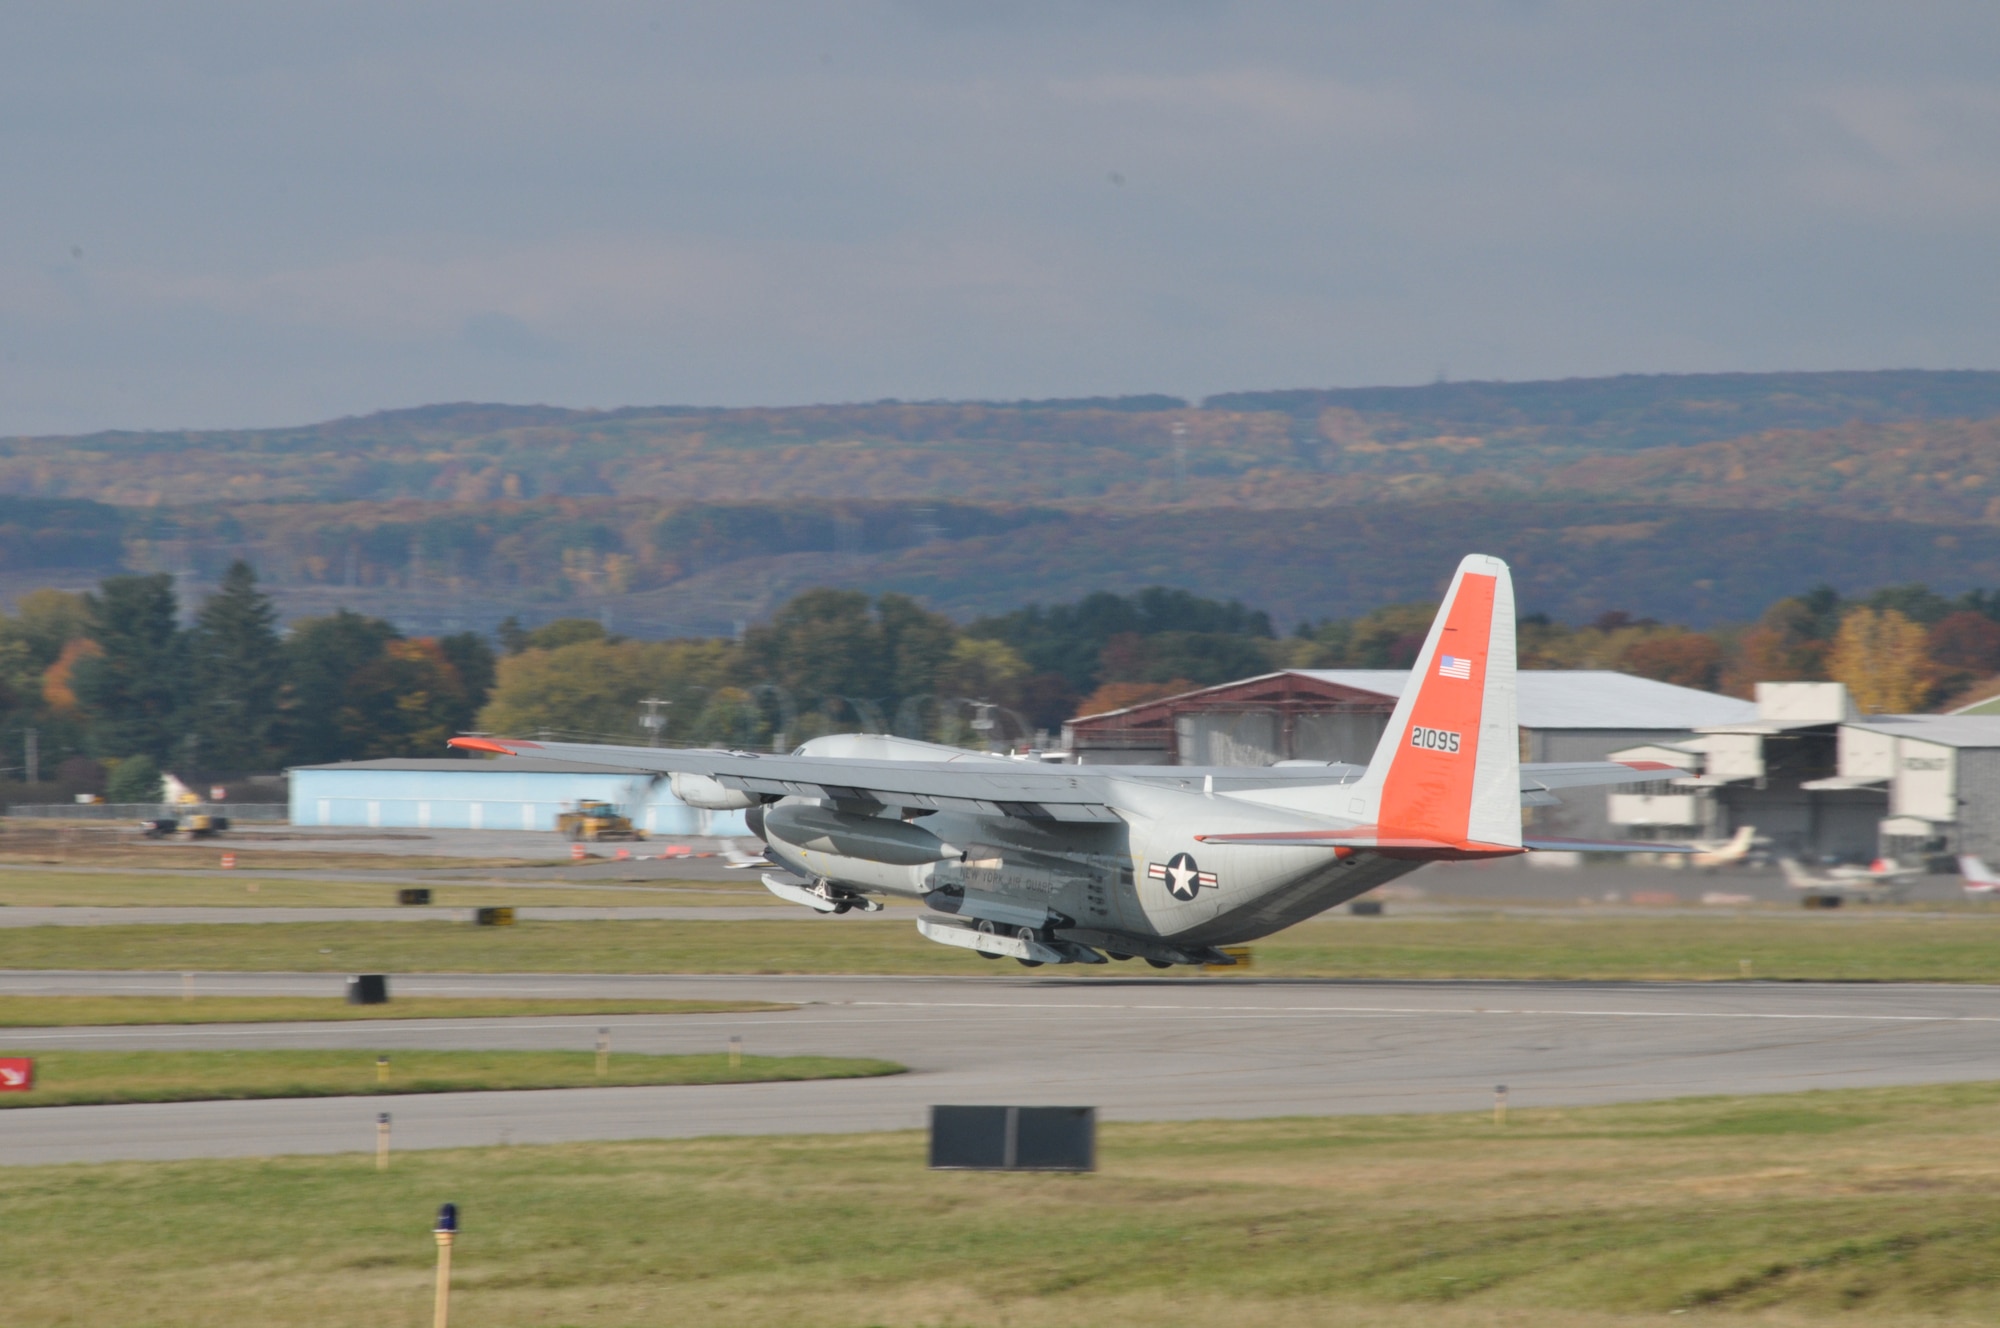 An LC-130 Hercules with the 109th Airlift Wing takes off from Stratton Air National Guard Base, Scotia, New York, on Oct. 17, 2014. The aircraft is headed to Antarctica for the Wing's 27th year participating in Operation Deep Freeze in support of the National Science Foundation. The 109th AW boasts the U.S. military's only ski-equipped aircraft, which has been supporting the NSF's South Pole research since 1988. (U.S. Air National Guard photo by Master Sgt. William Gizara/Released)